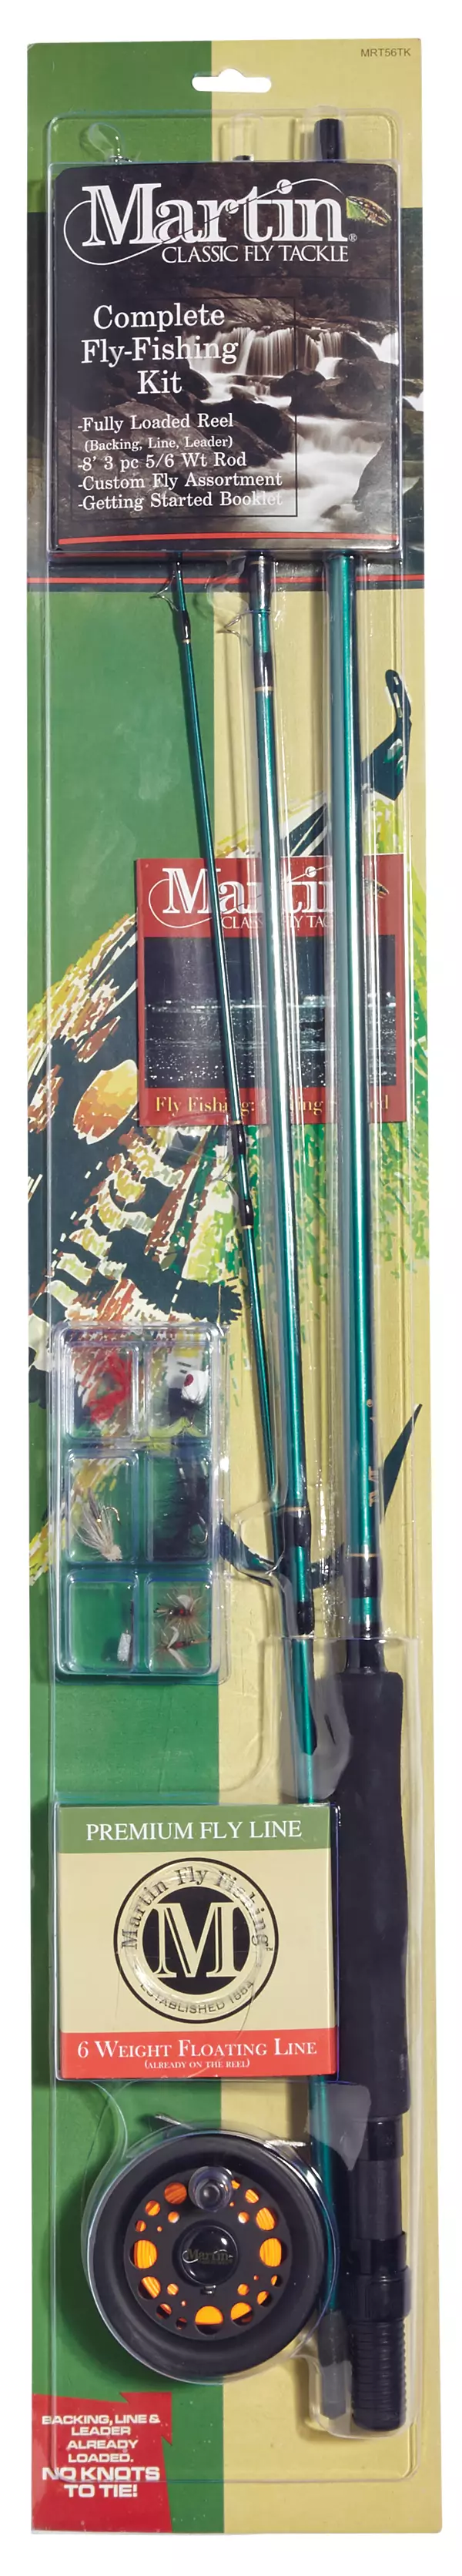 Martin Complete Fly Fishing Kit - LW 5/6 - 8' / 3 pieces ~ CASE OF 3